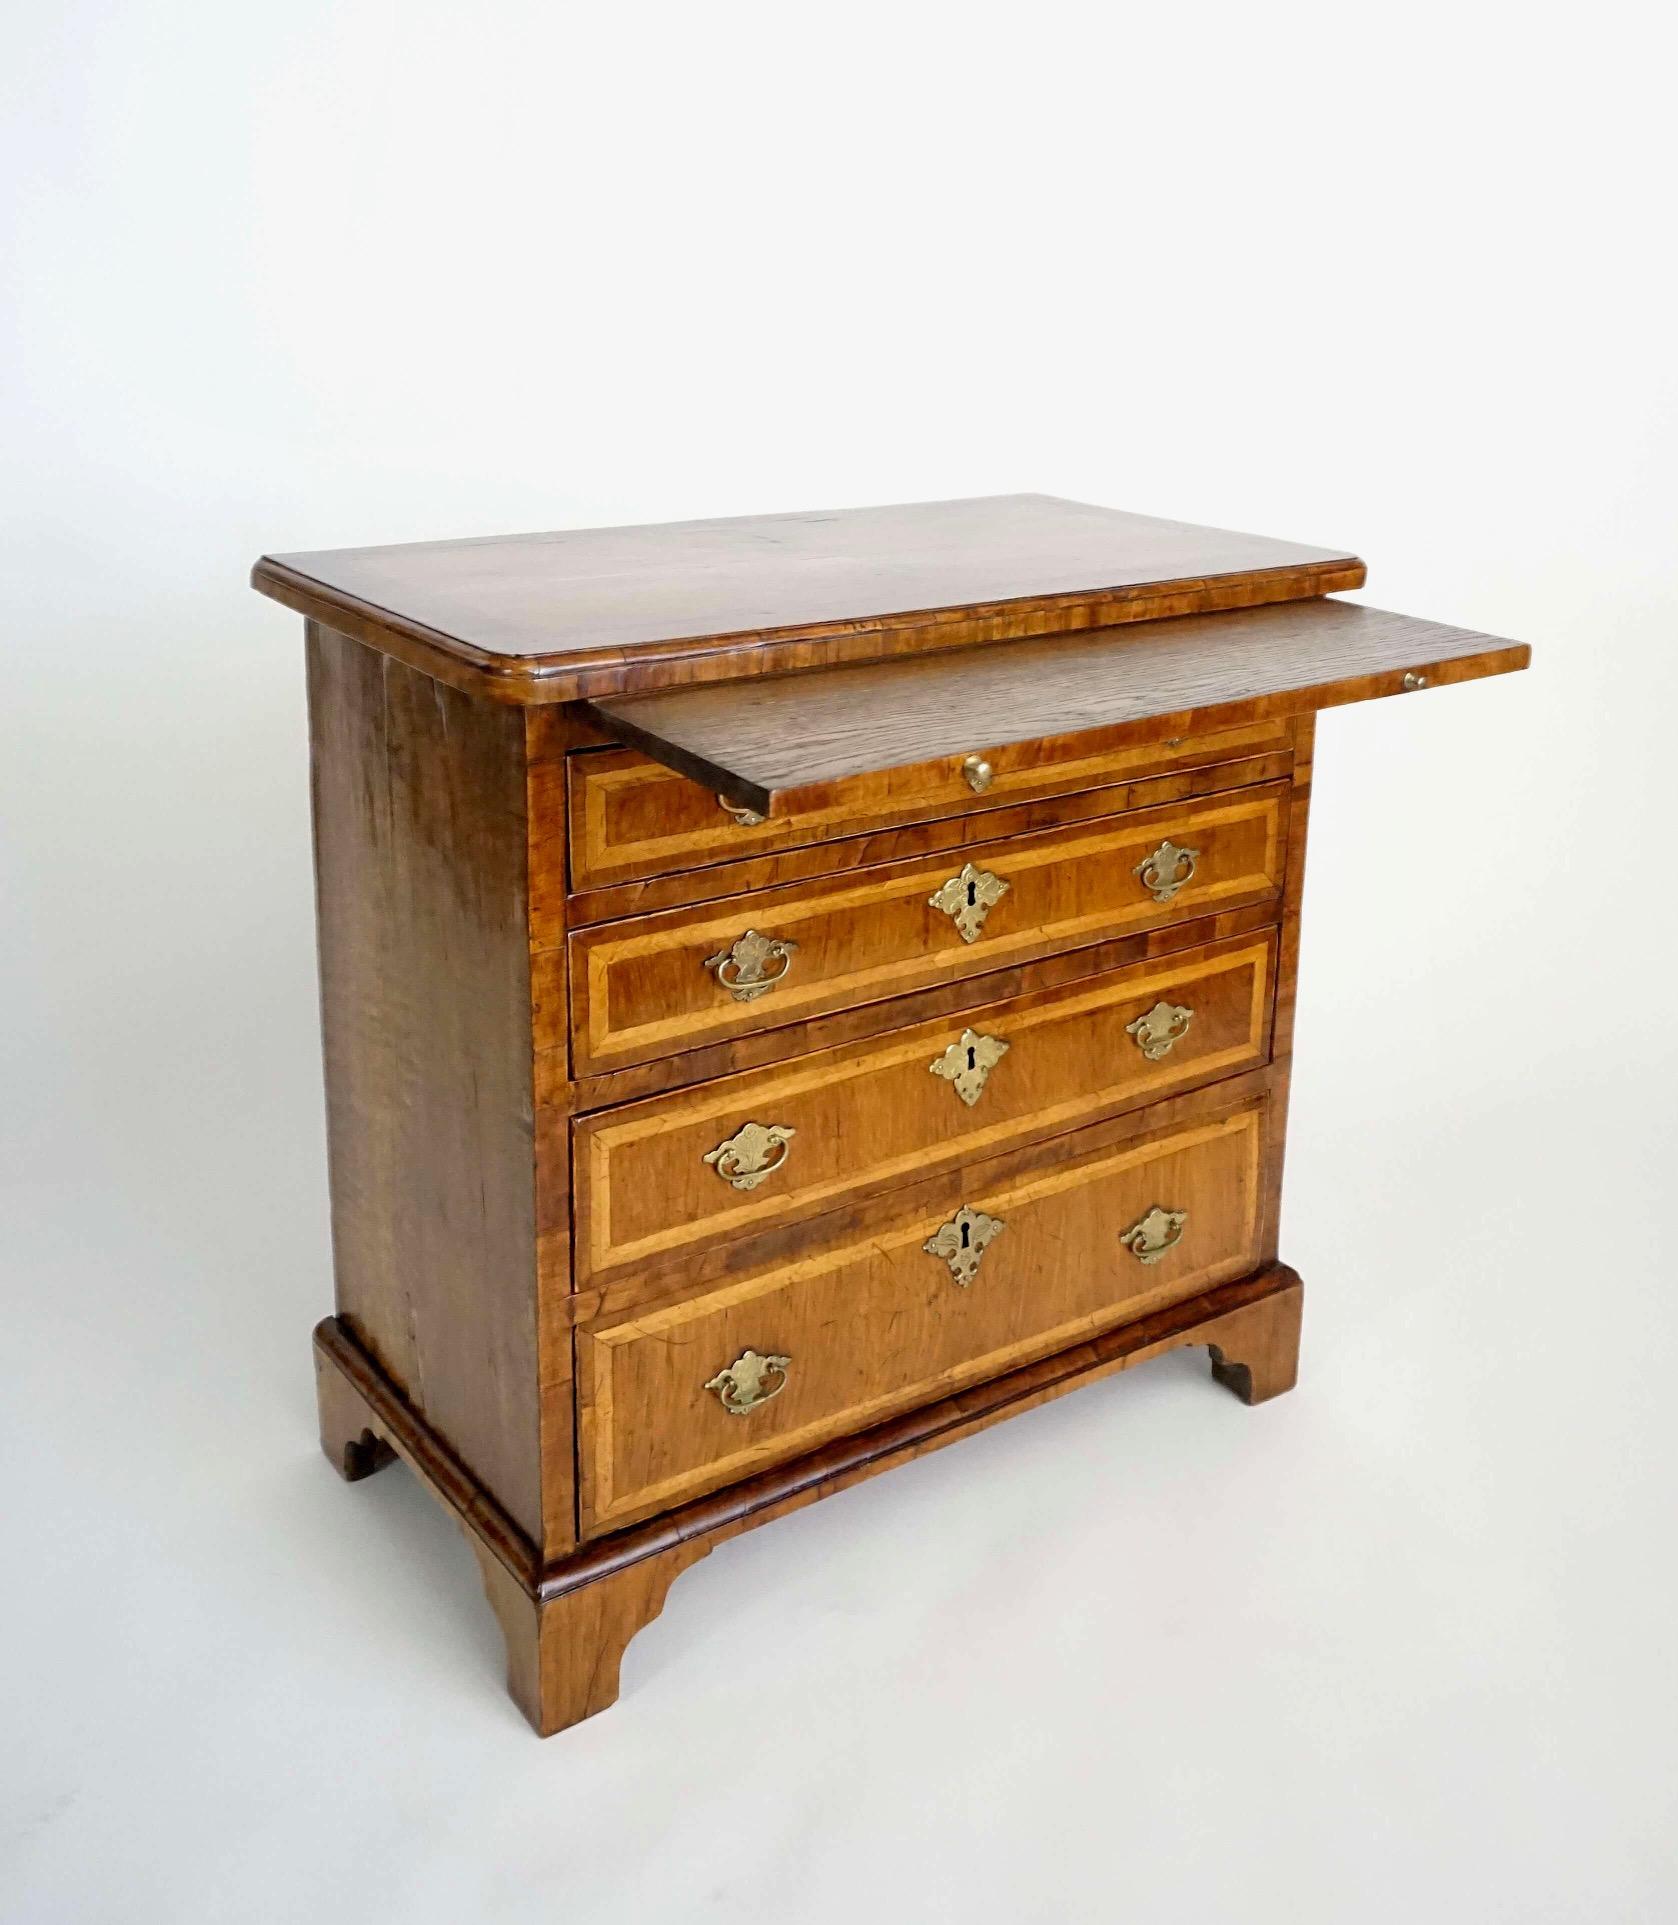 English Walnut and Satinwood Inlaid Petite Chest or Bachelor's Chest, circa 1715 For Sale 2